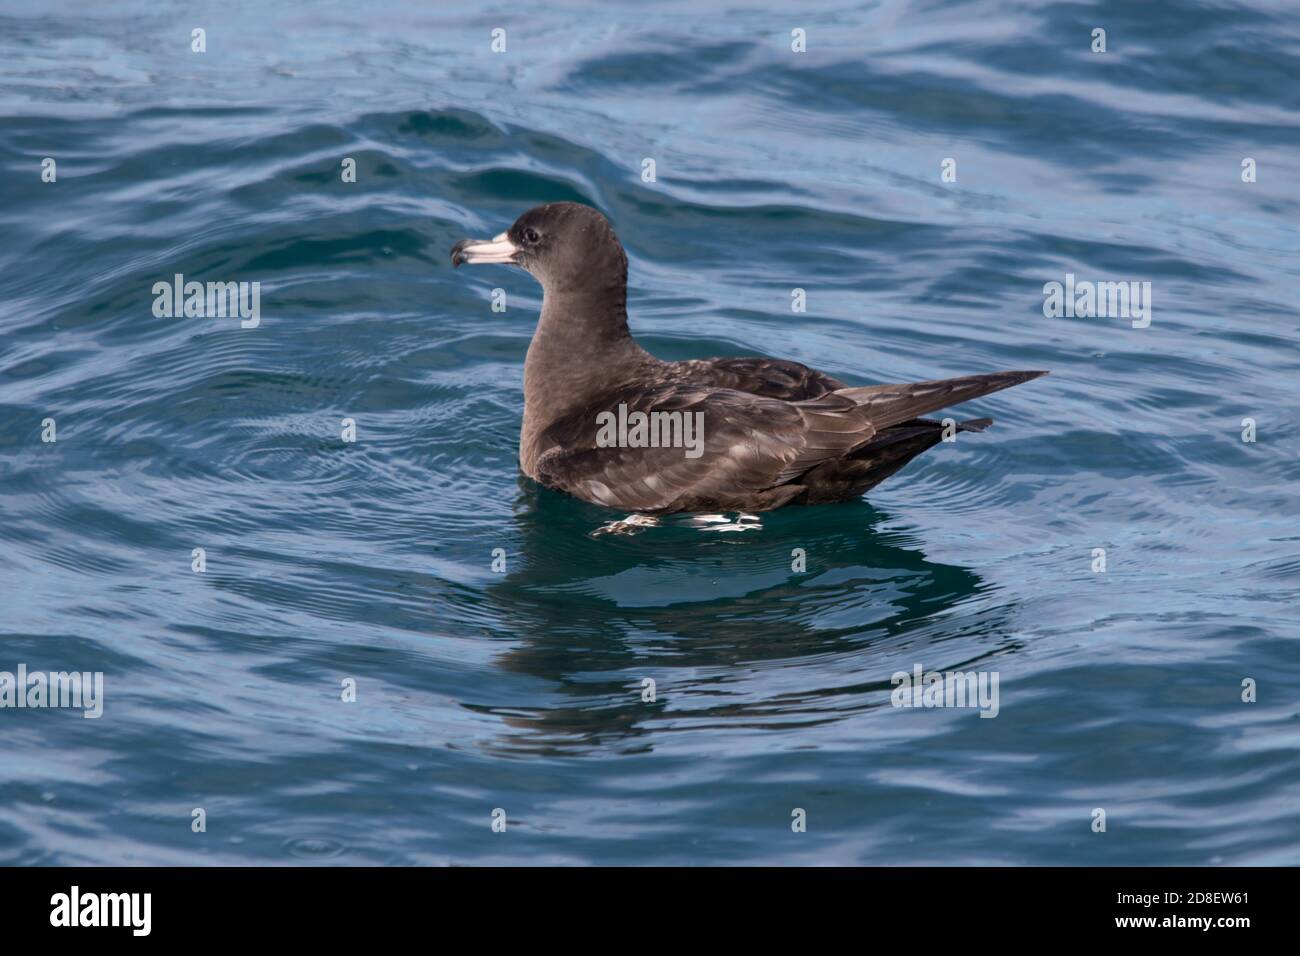 A Flesh-footed Shearwater (Ardenna carneipes; formerly Puffinus carneipes) photographed off the coast of New Zealand. Stock Photo